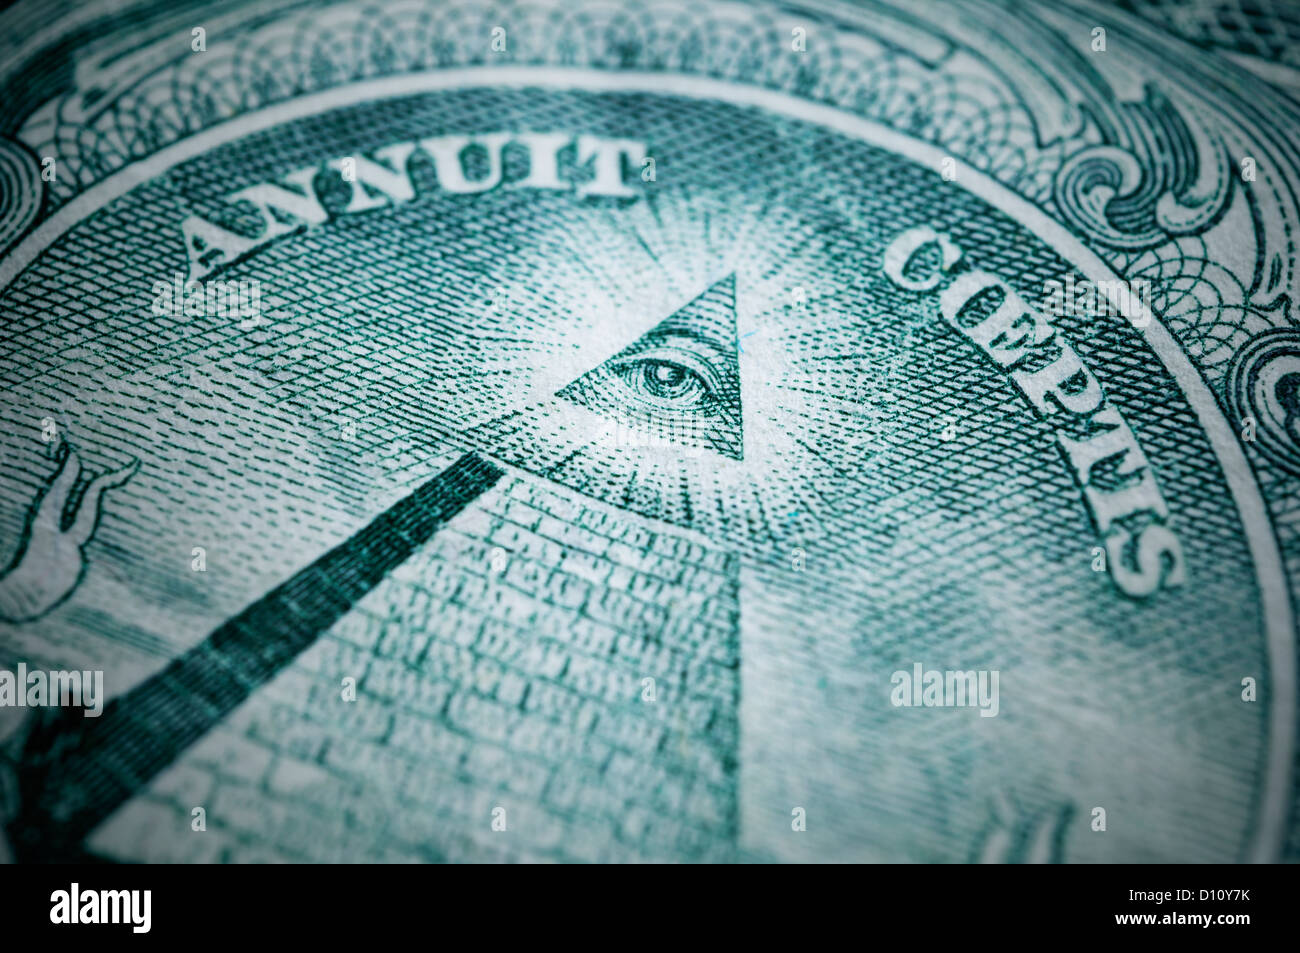 Detail of Annuit Coeptis on a US dollar bill Stock Photo